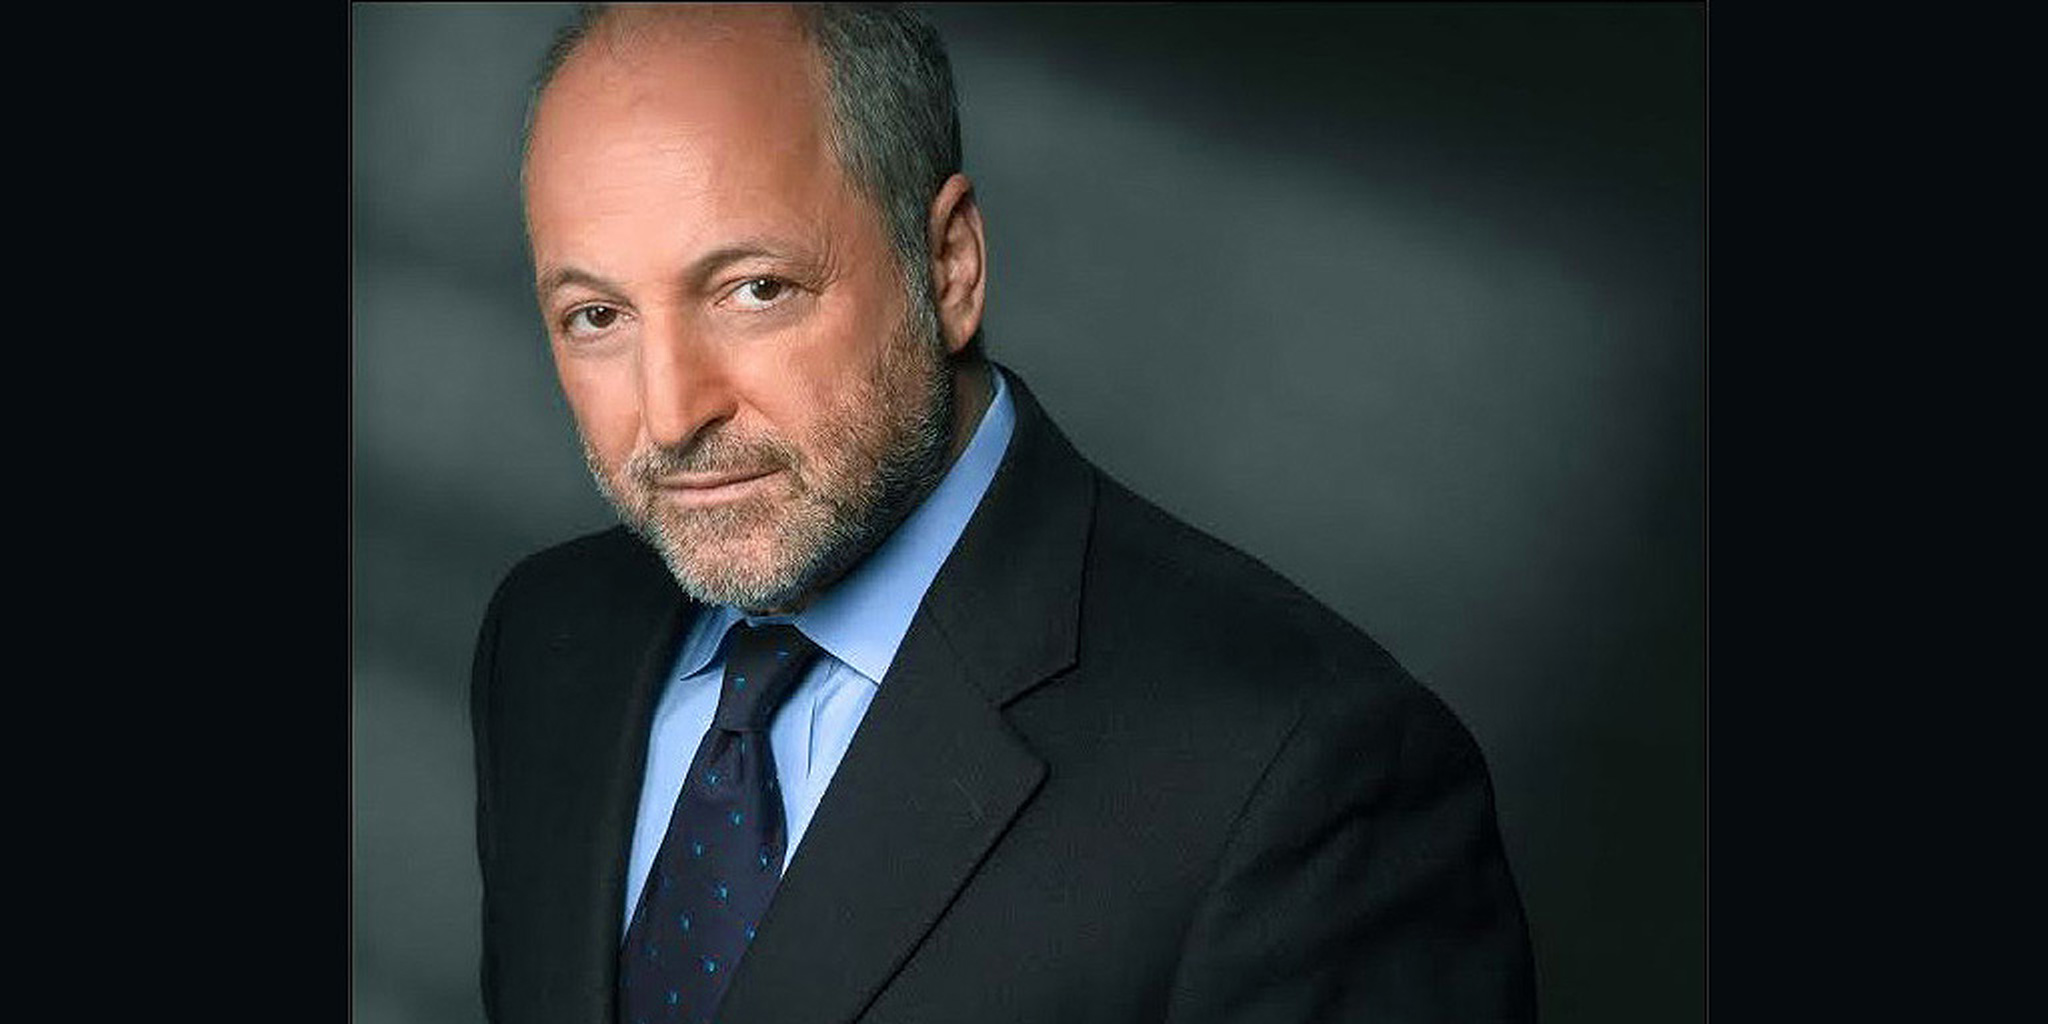 Novelist and Memoirist André Aciman ('73) Will Deliver the Keynote Address at Lehman College's 50th Annual Commencement and Receive the 2018 Distinguished Alumni Award